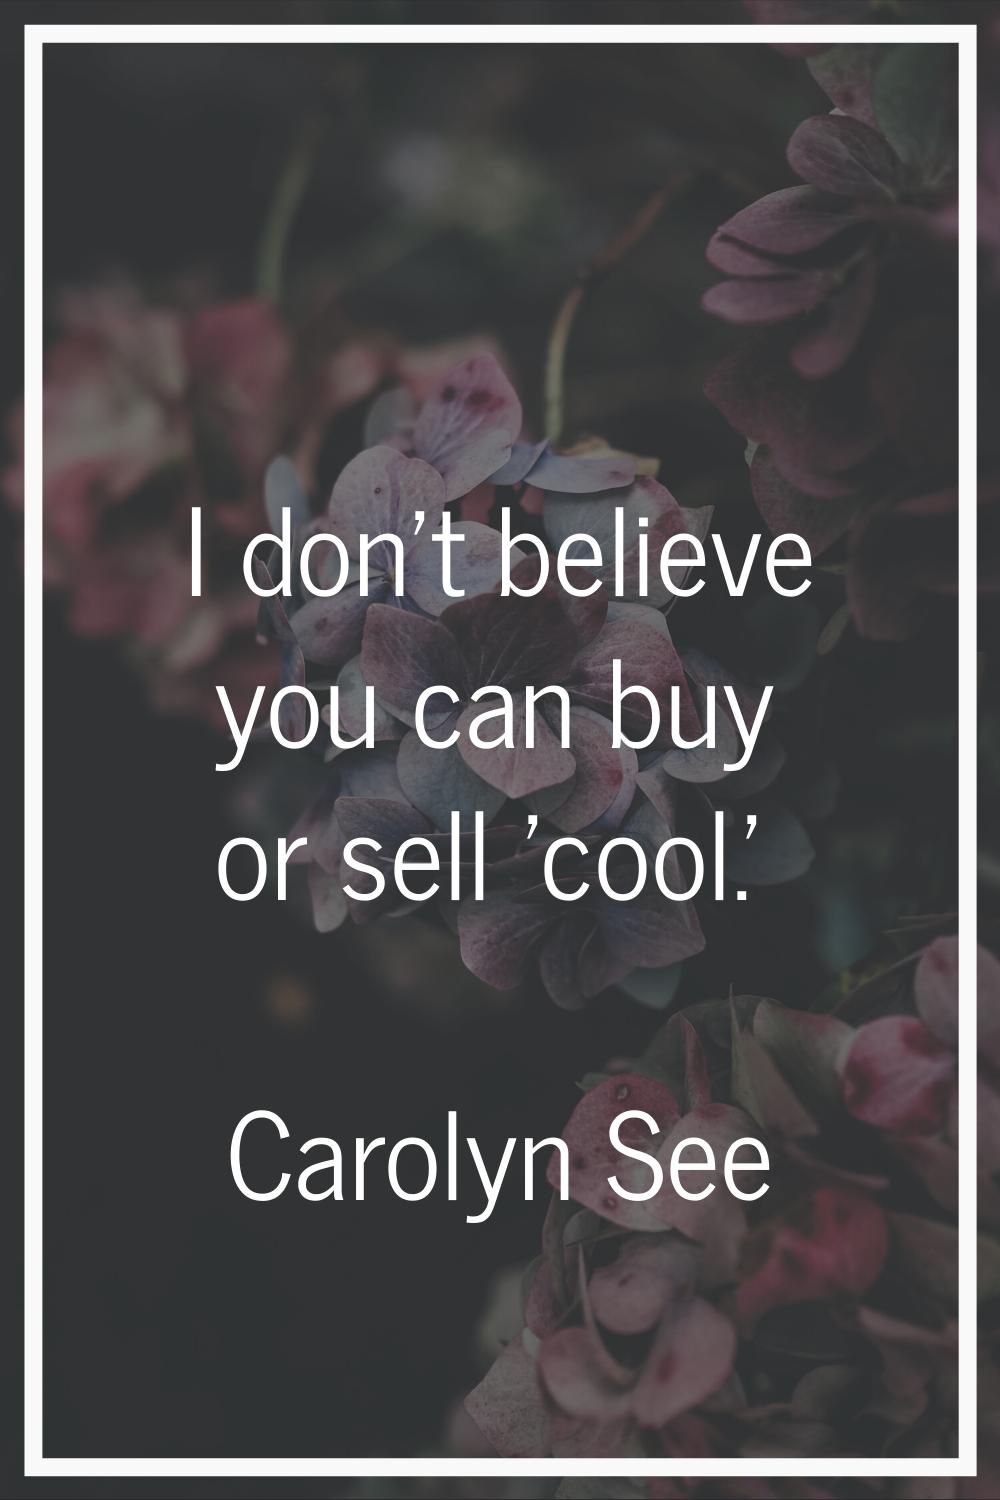 I don't believe you can buy or sell 'cool.'